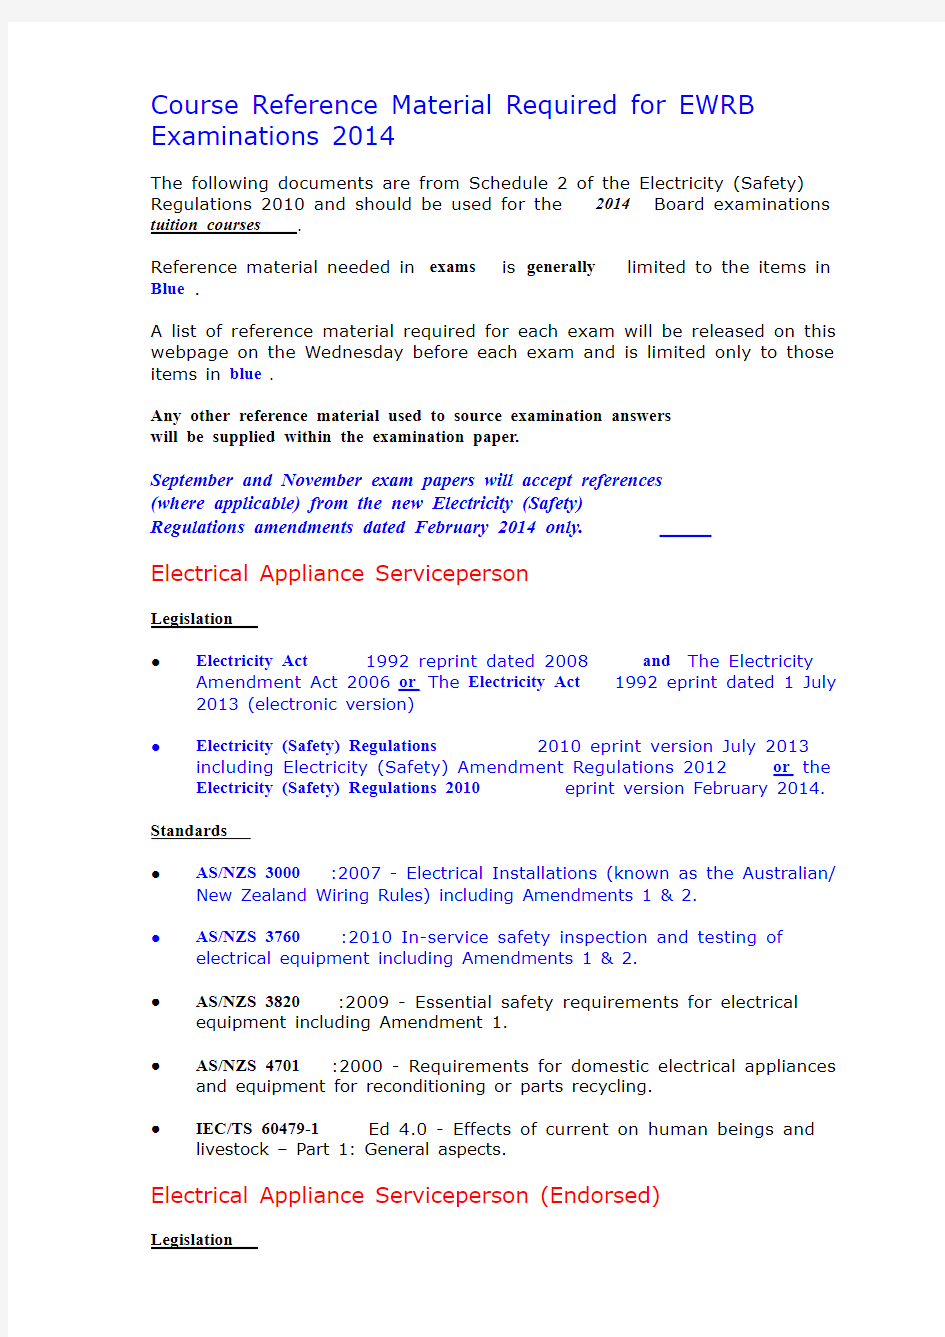 course-material-required-for-board-exams-2014